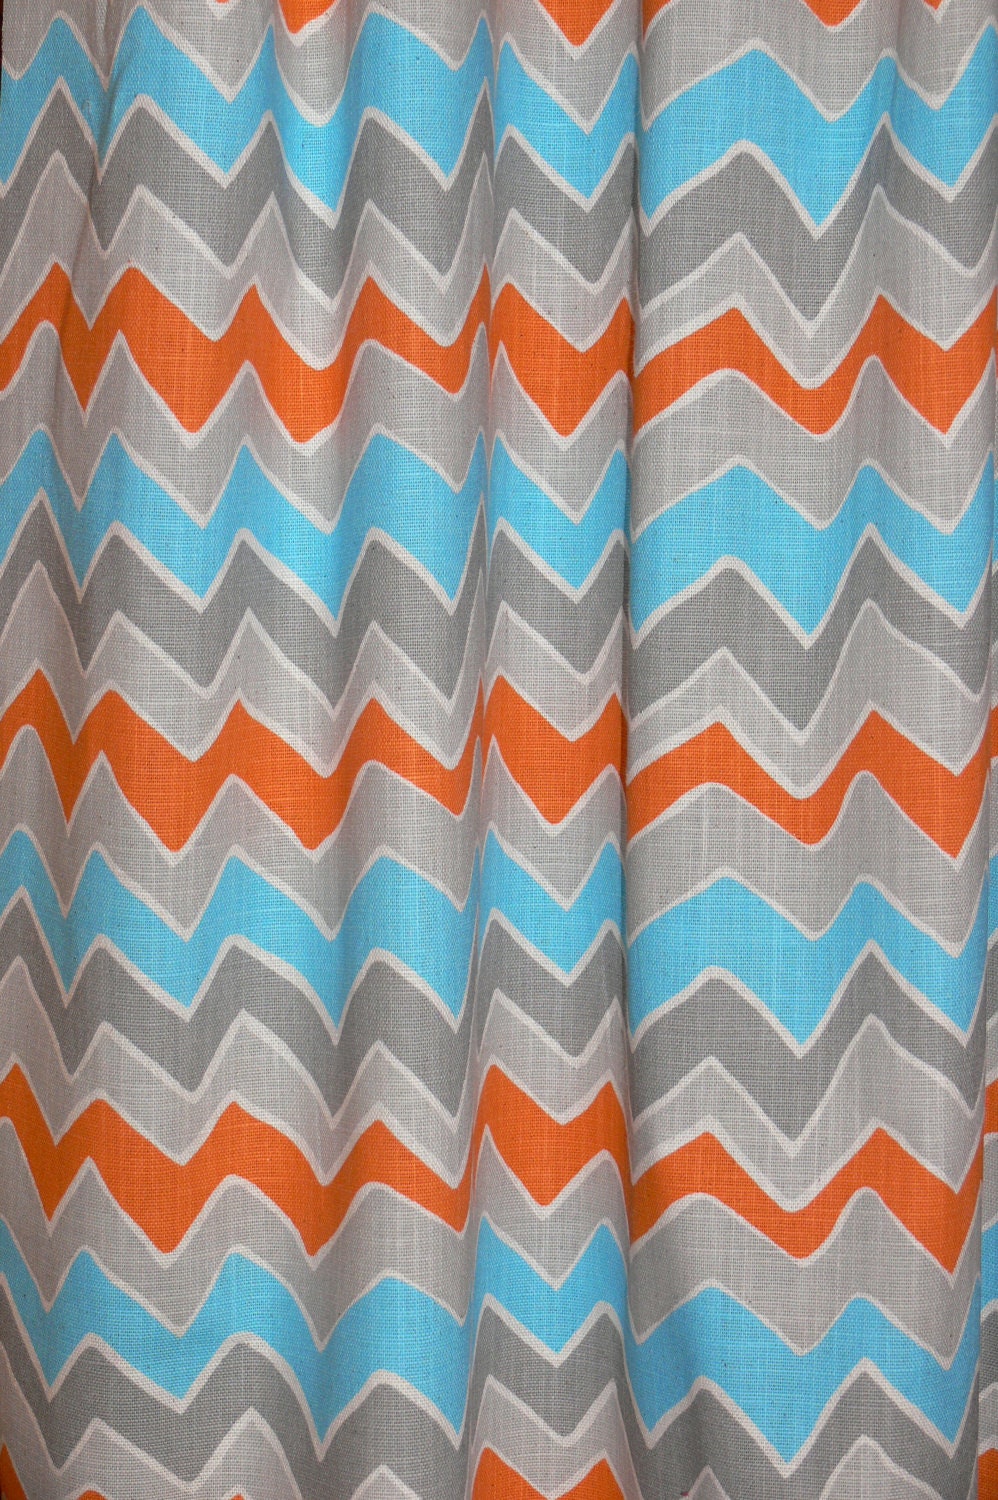 Popular items for chevron curtains on Etsy